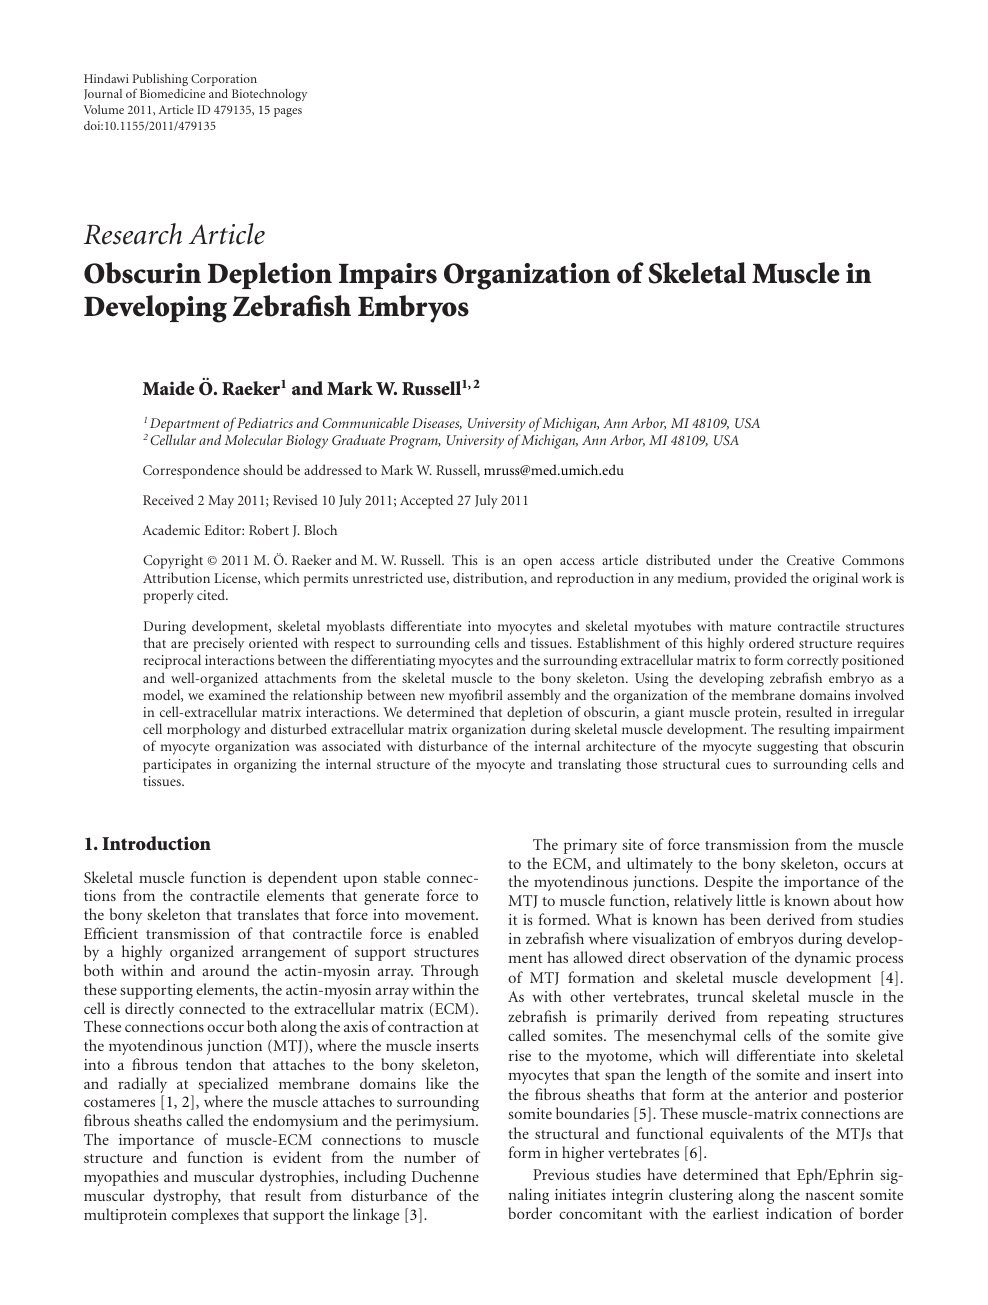 Obscurin Depletion Impairs Organization Of Skeletal Muscle In Developing Zebrafish Embryos Topic Of Research Paper In Biological Sciences Download Scholarly Article Pdf And Read For Free On Cyberleninka Open Science Hub